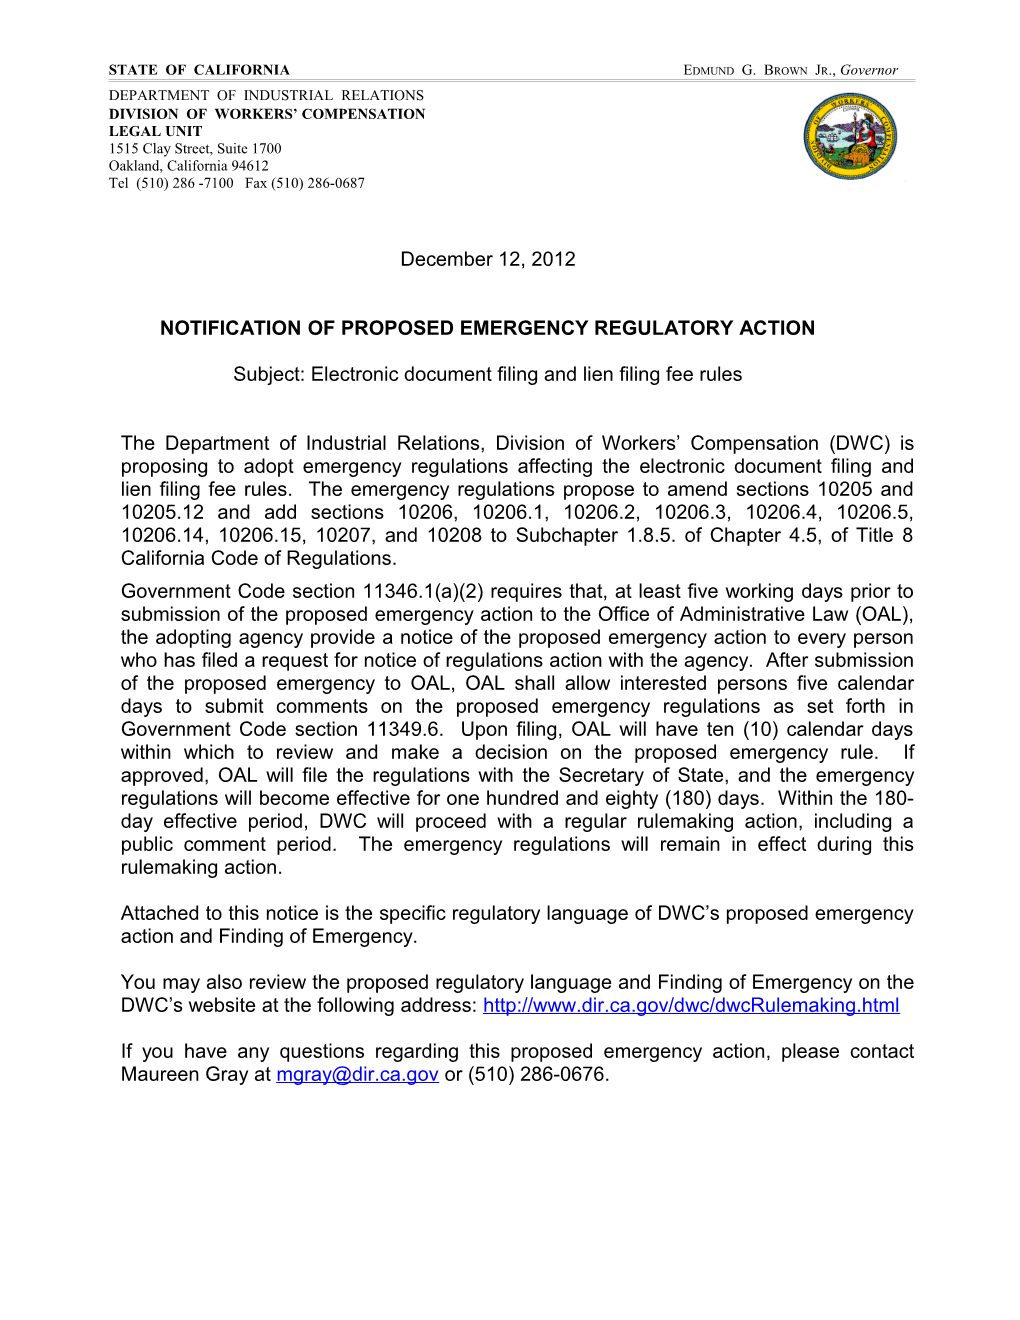 Notification of Proposed Emergency Regulatory Action